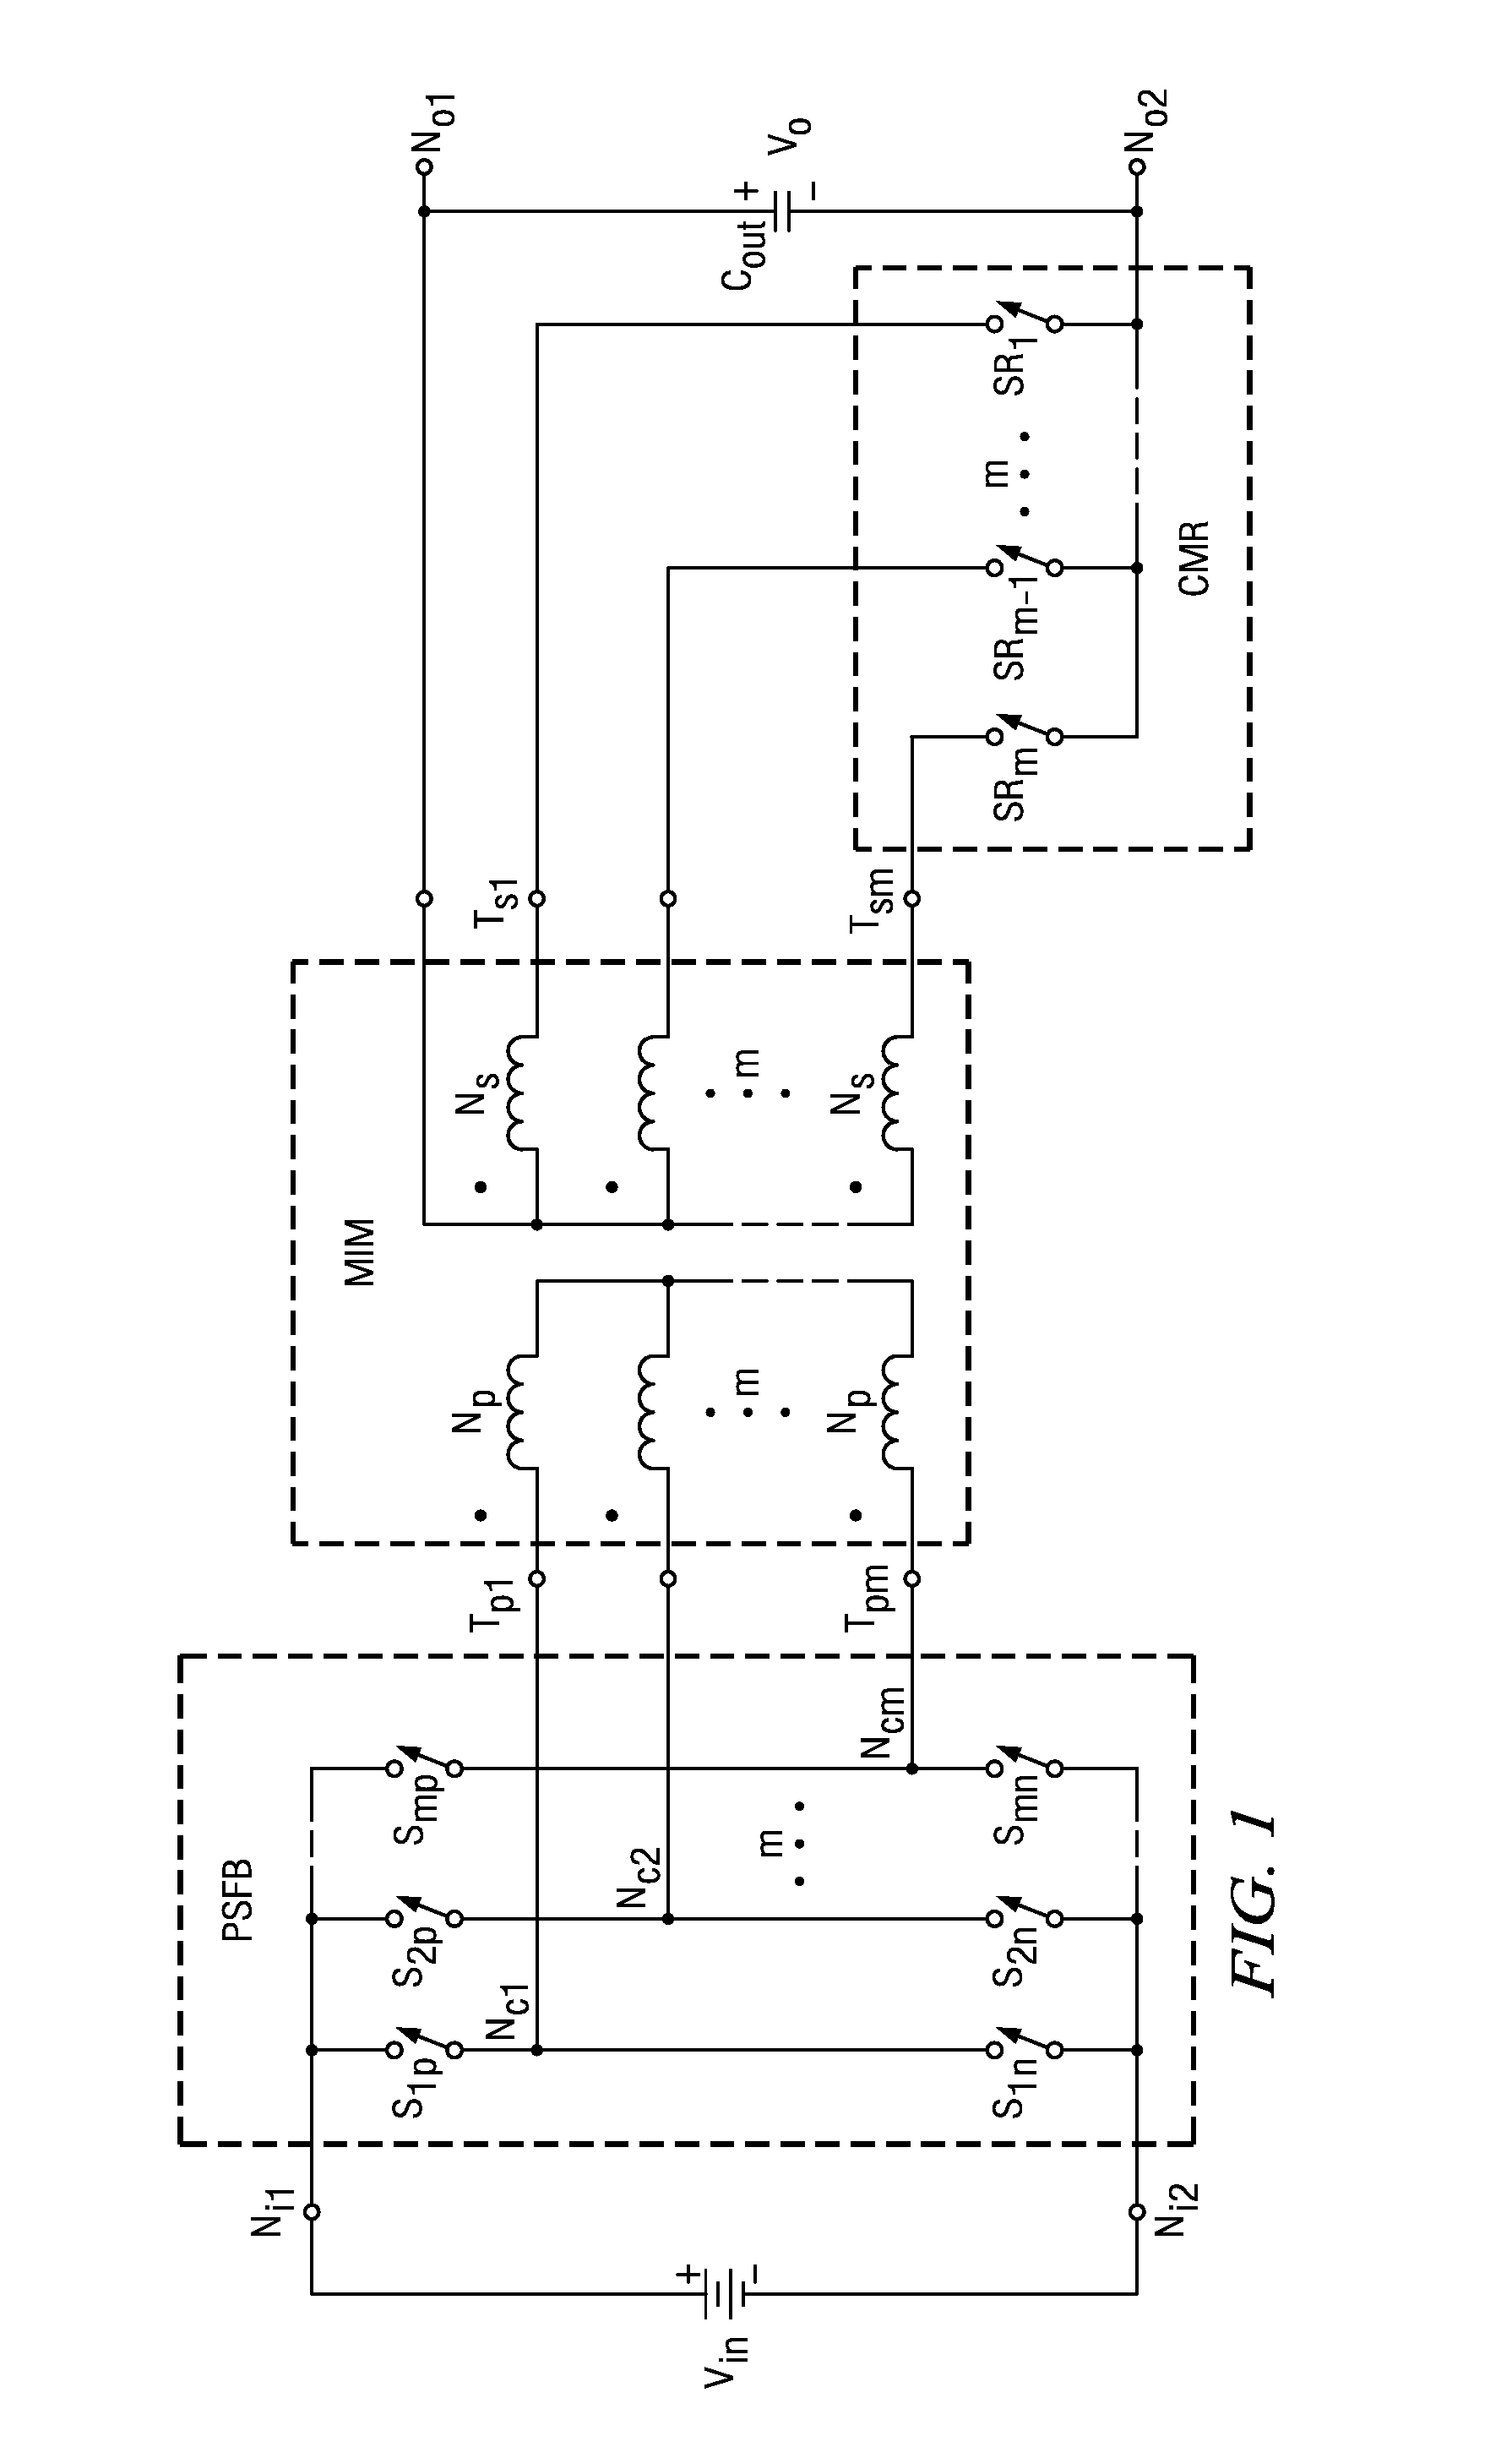 Power converter employing integrated magnetics with a current multiplier rectifier and method of operating the same